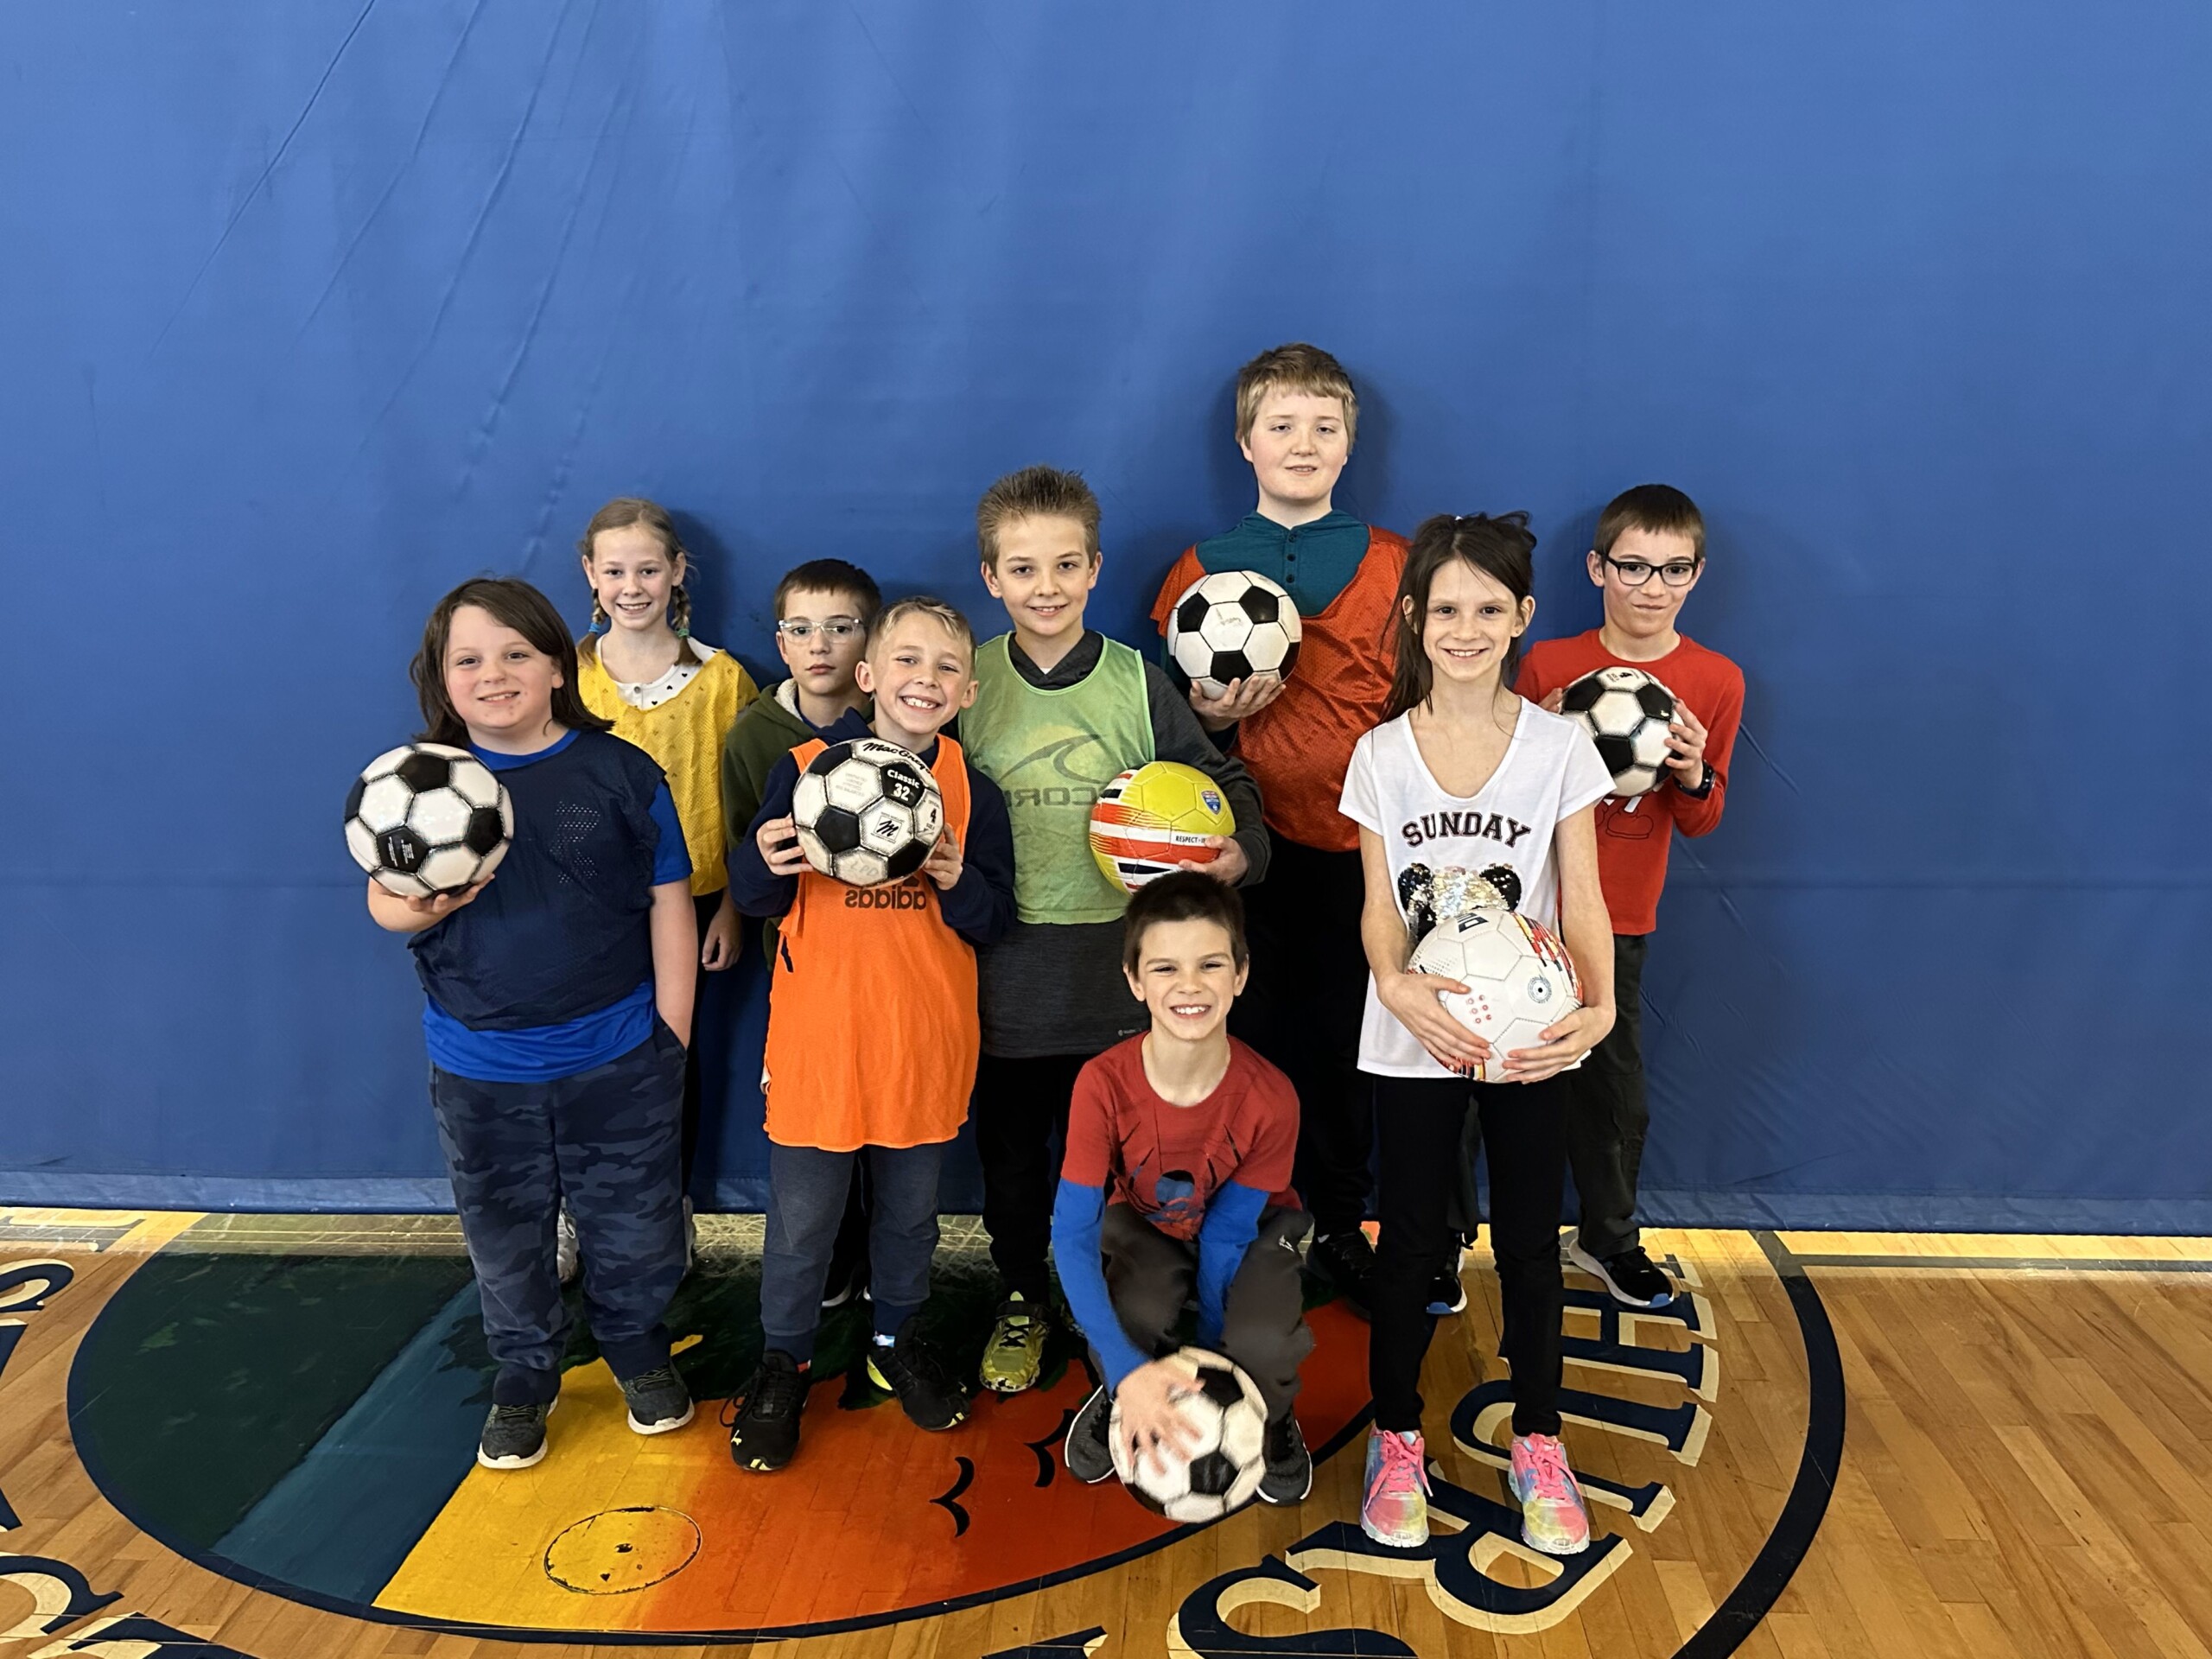 Group photo of young kids posing with soccer balls